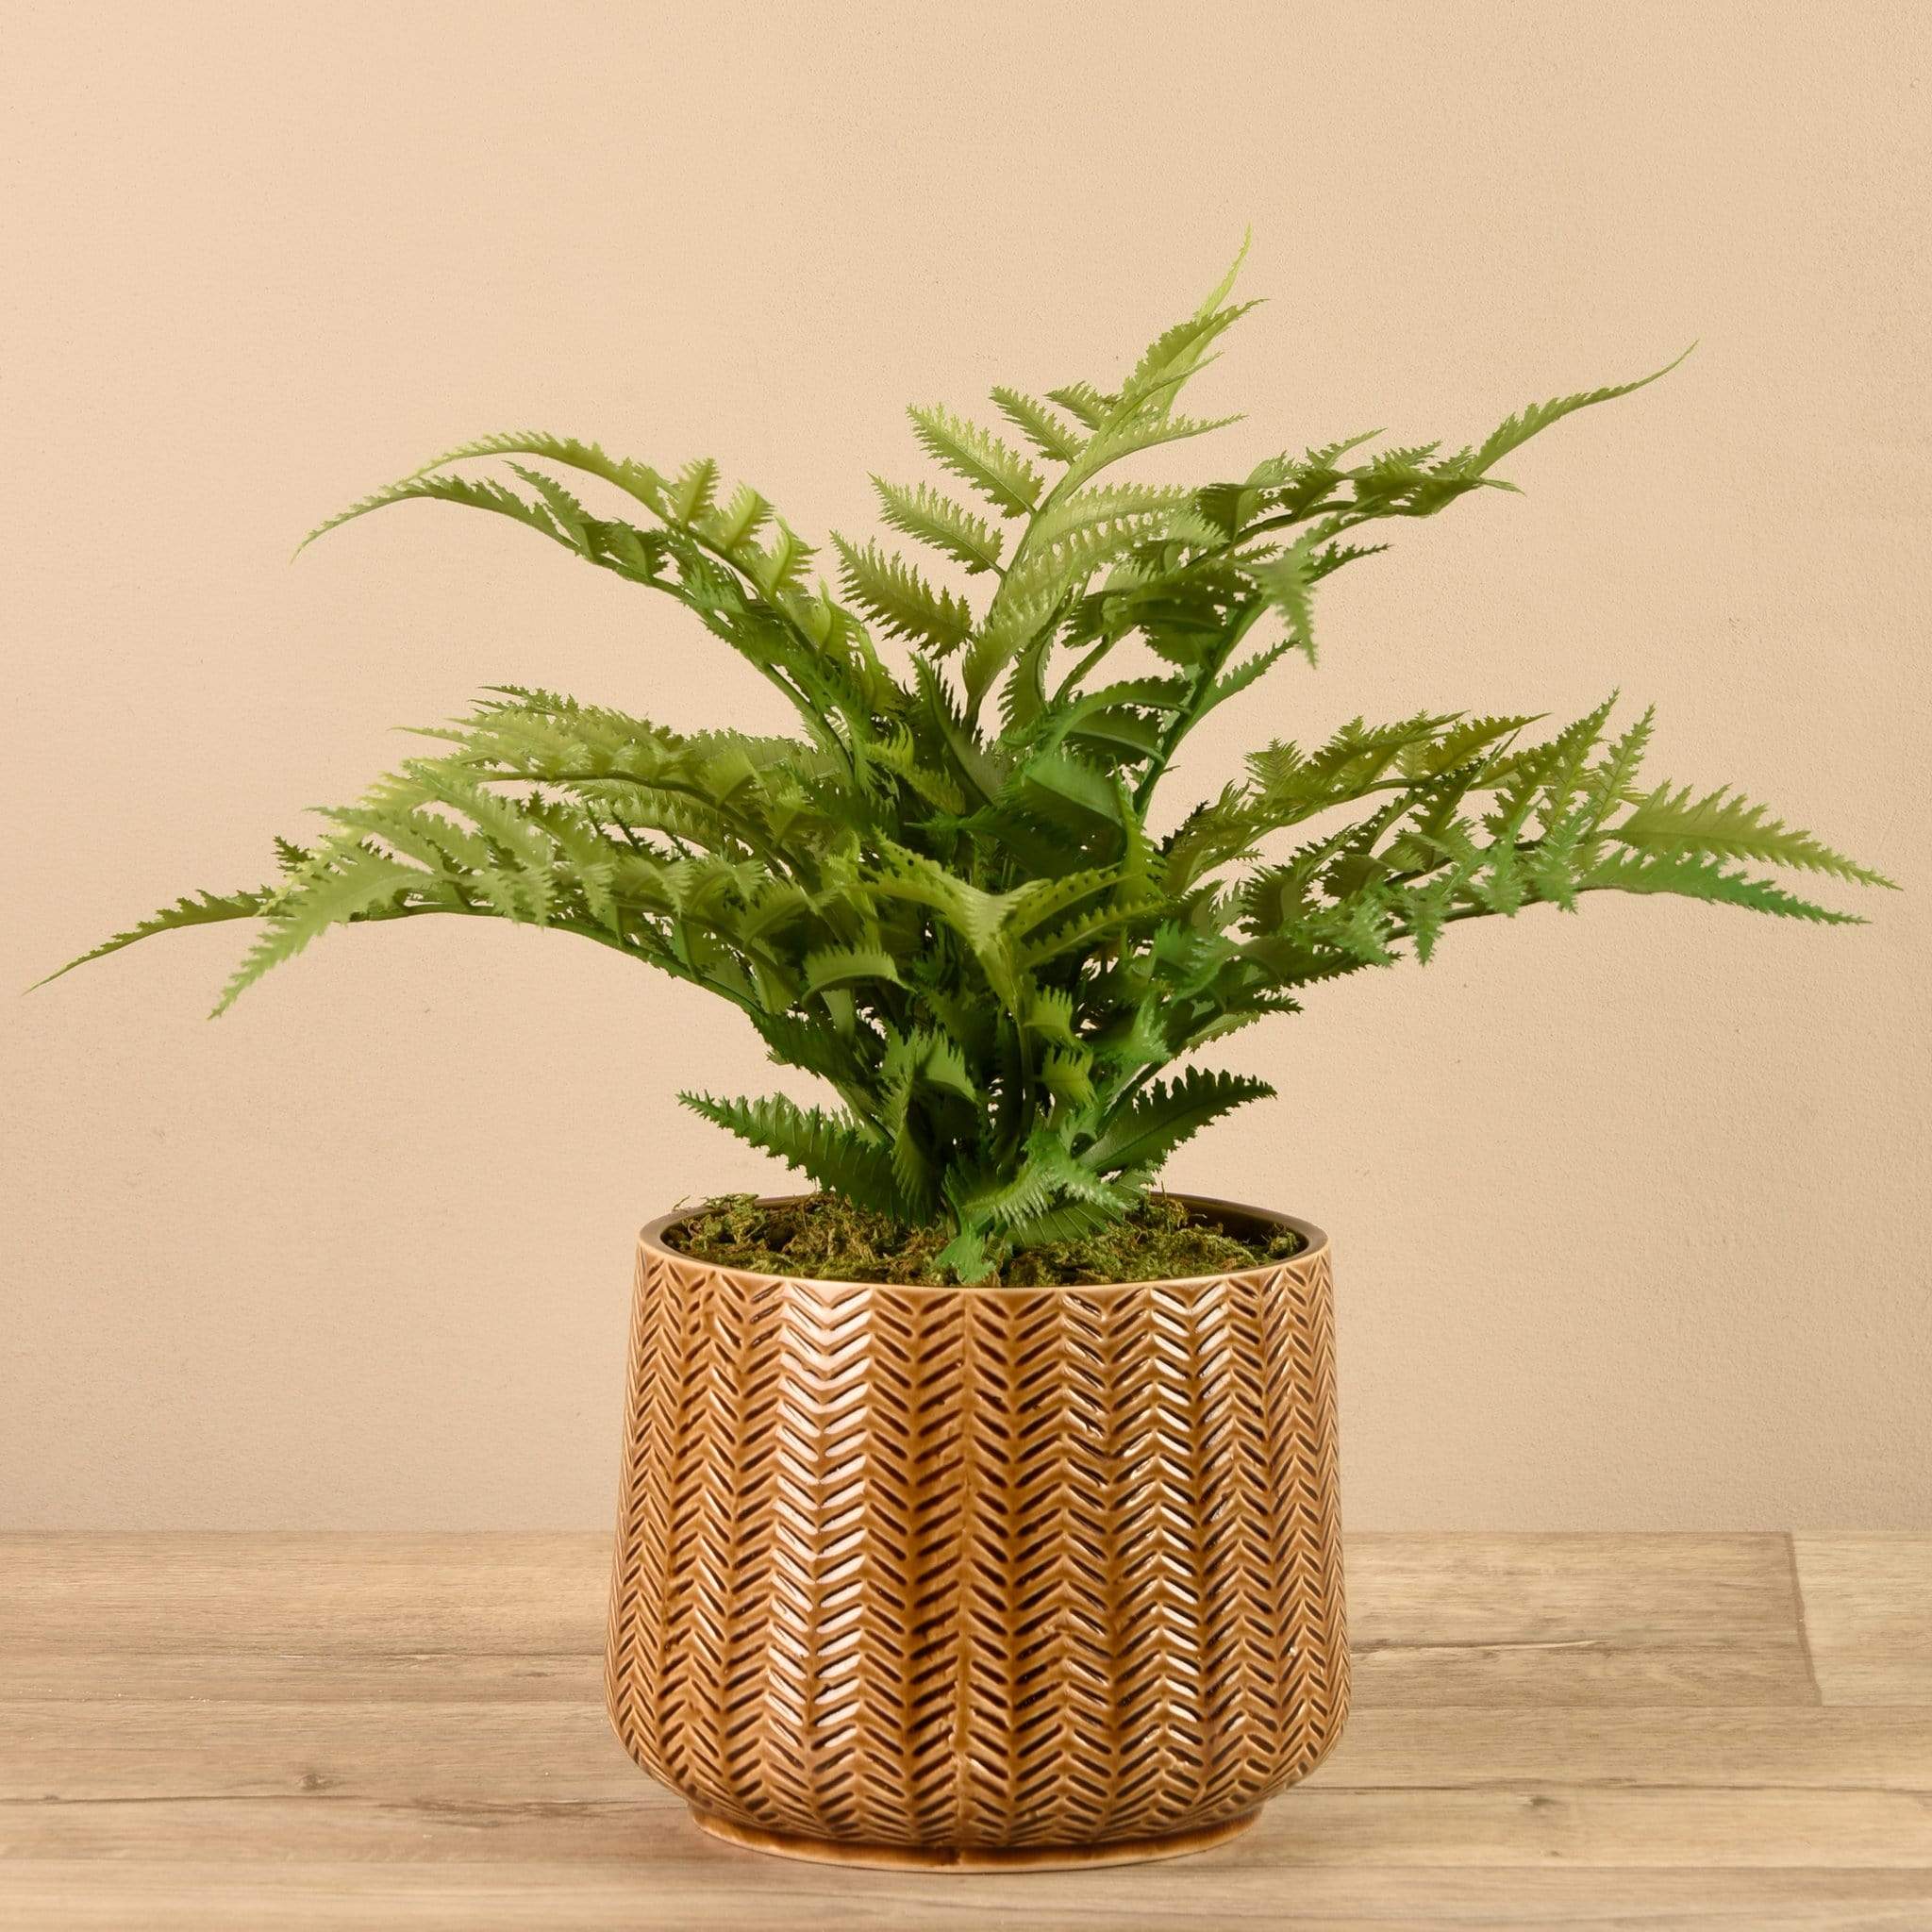 Artificial Potted Fern - Bloomr